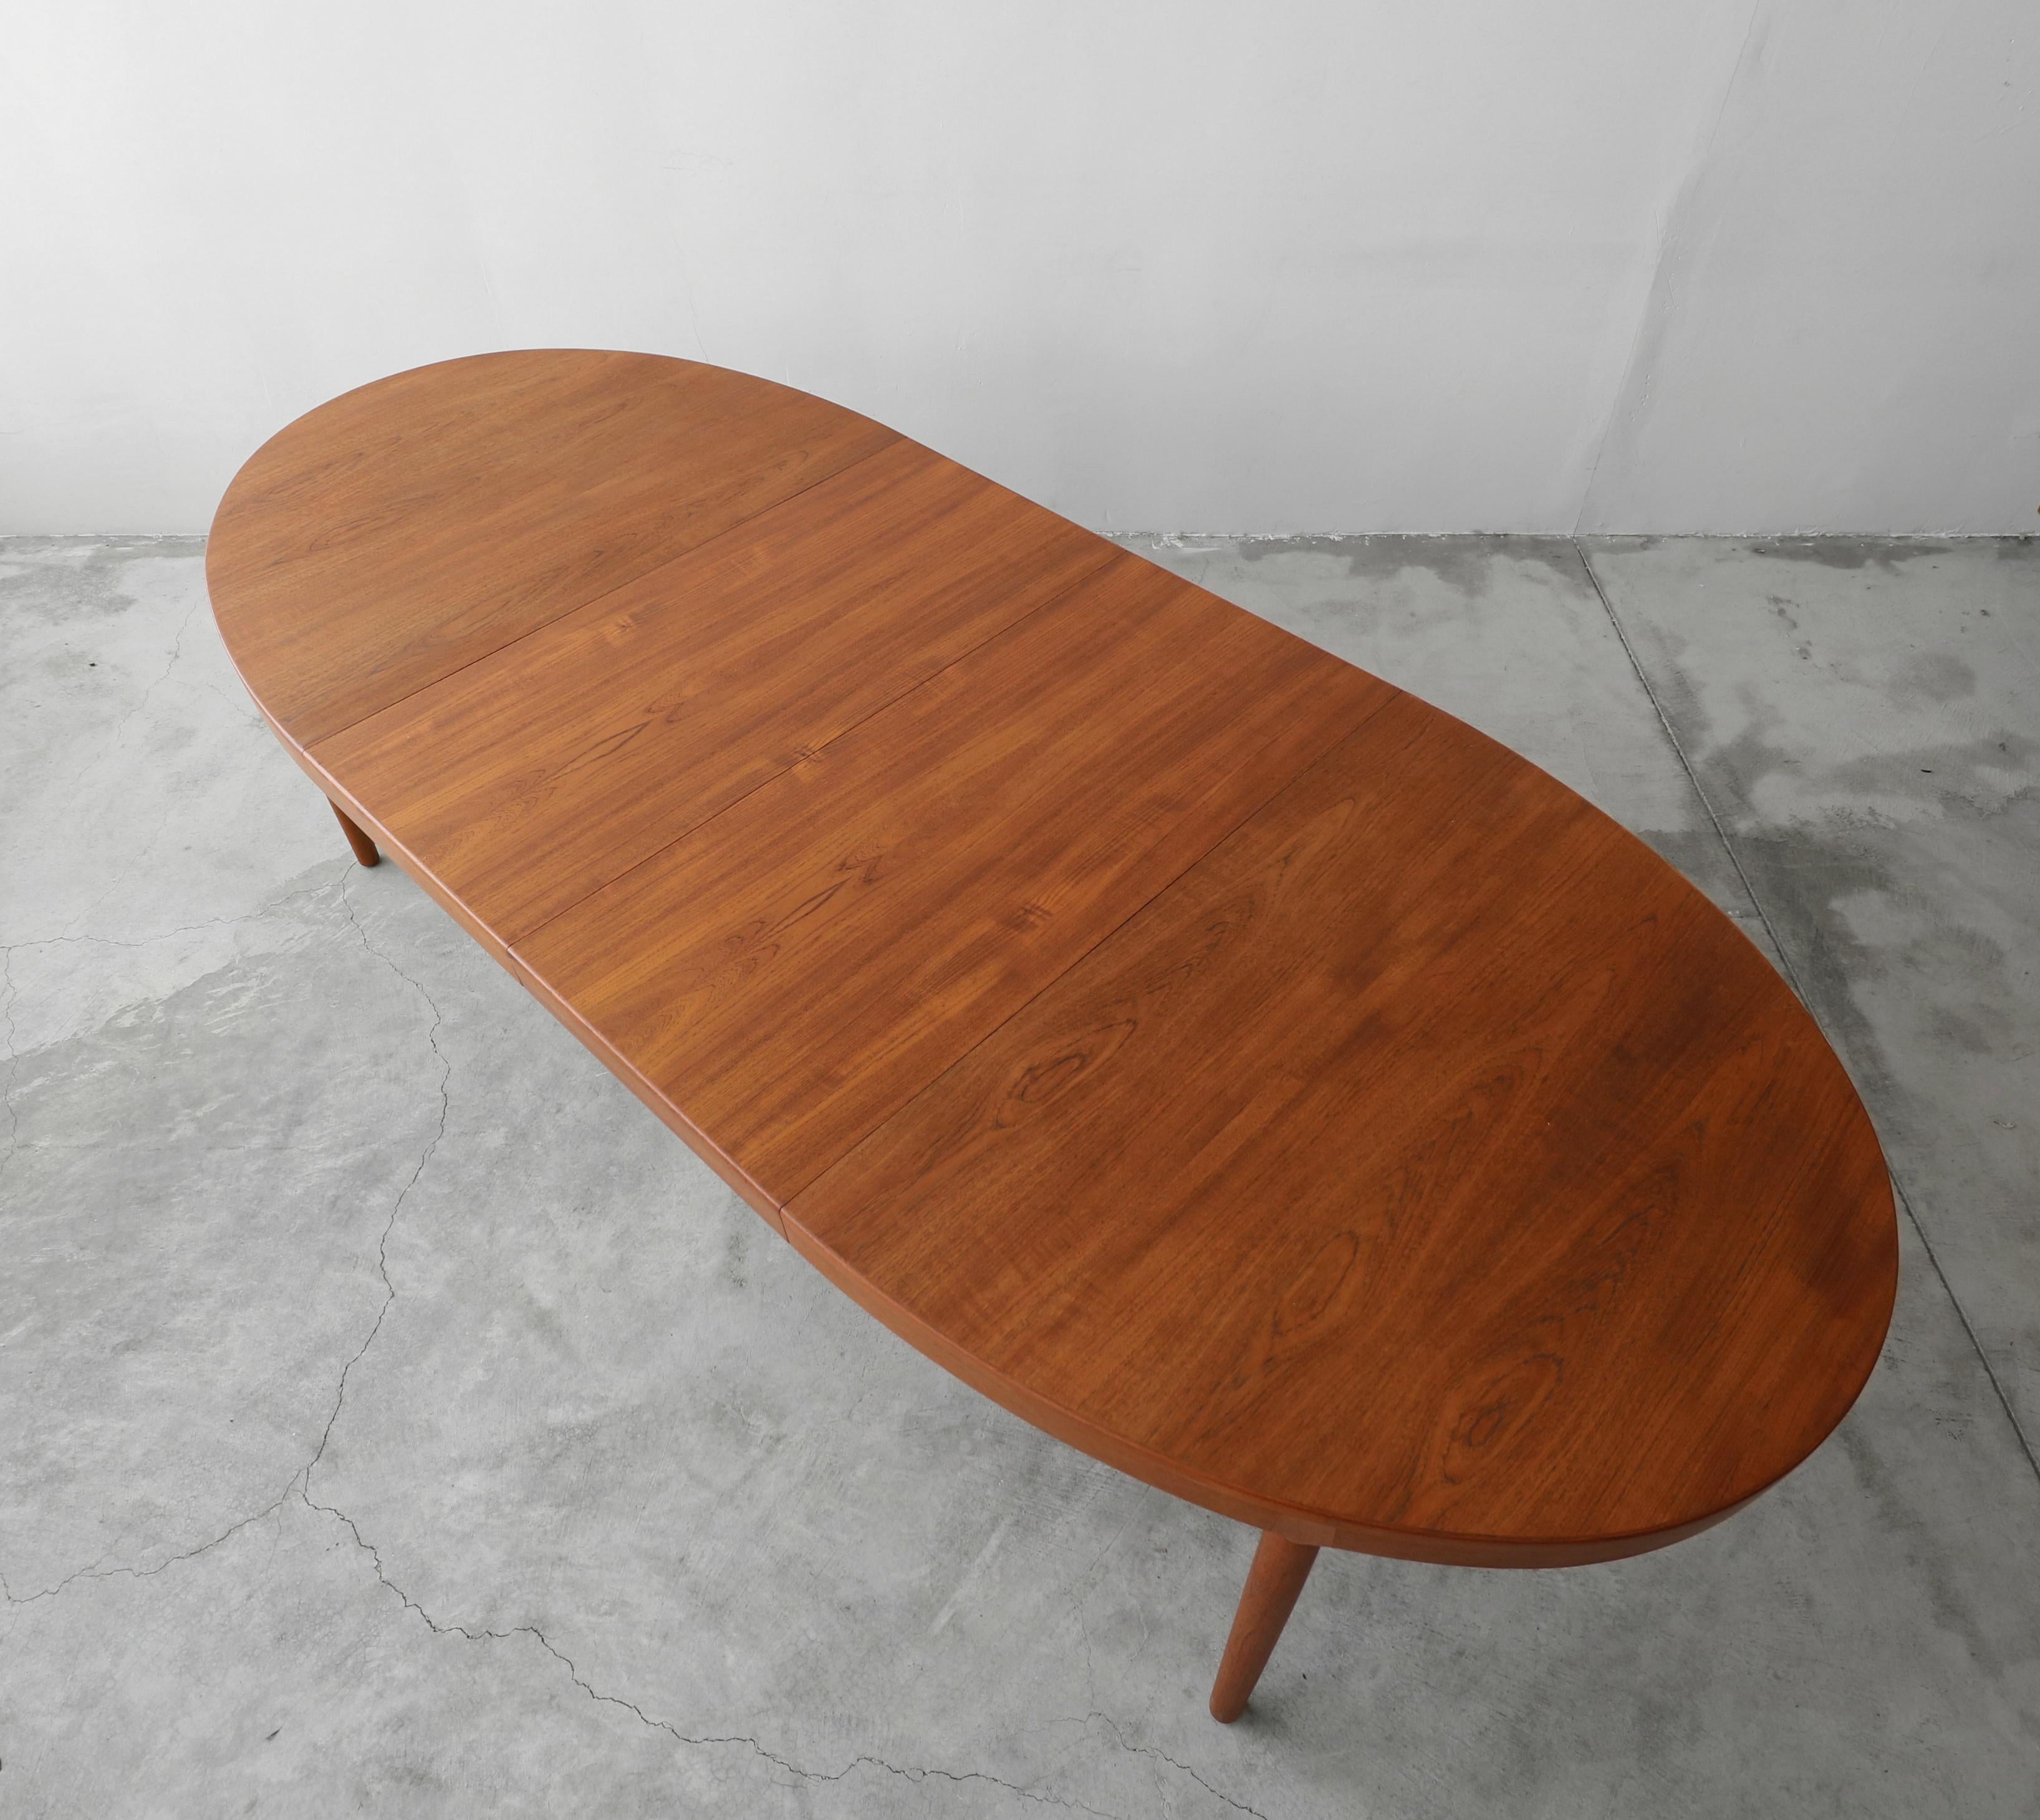 20th Century Midcentury Danish Teak Oval Dining Table by Harry Ostergaard for A/S Randers